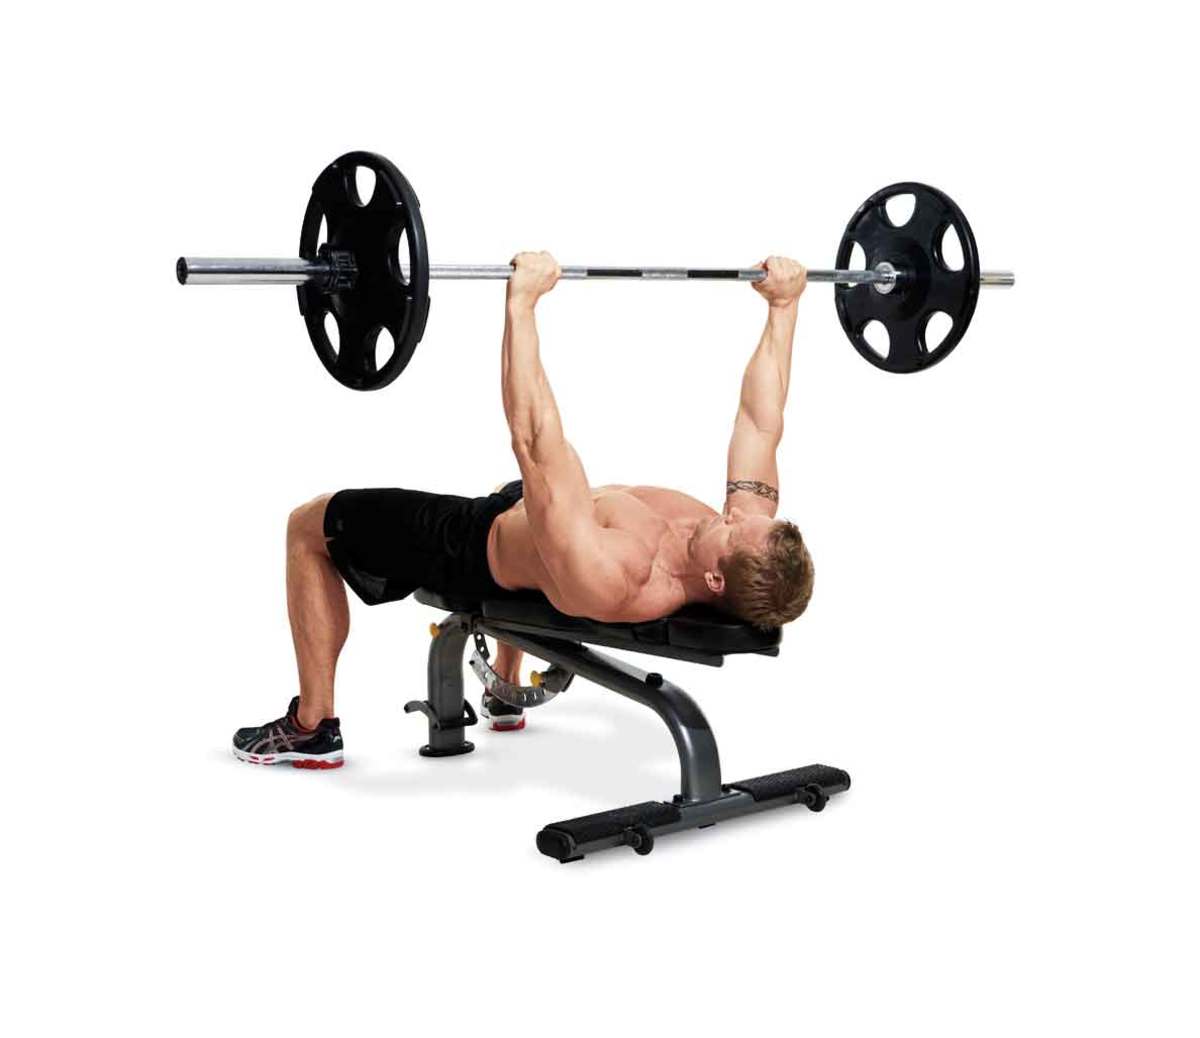 Bench Press Like the Pros by Avoiding These Rookie Mistakes